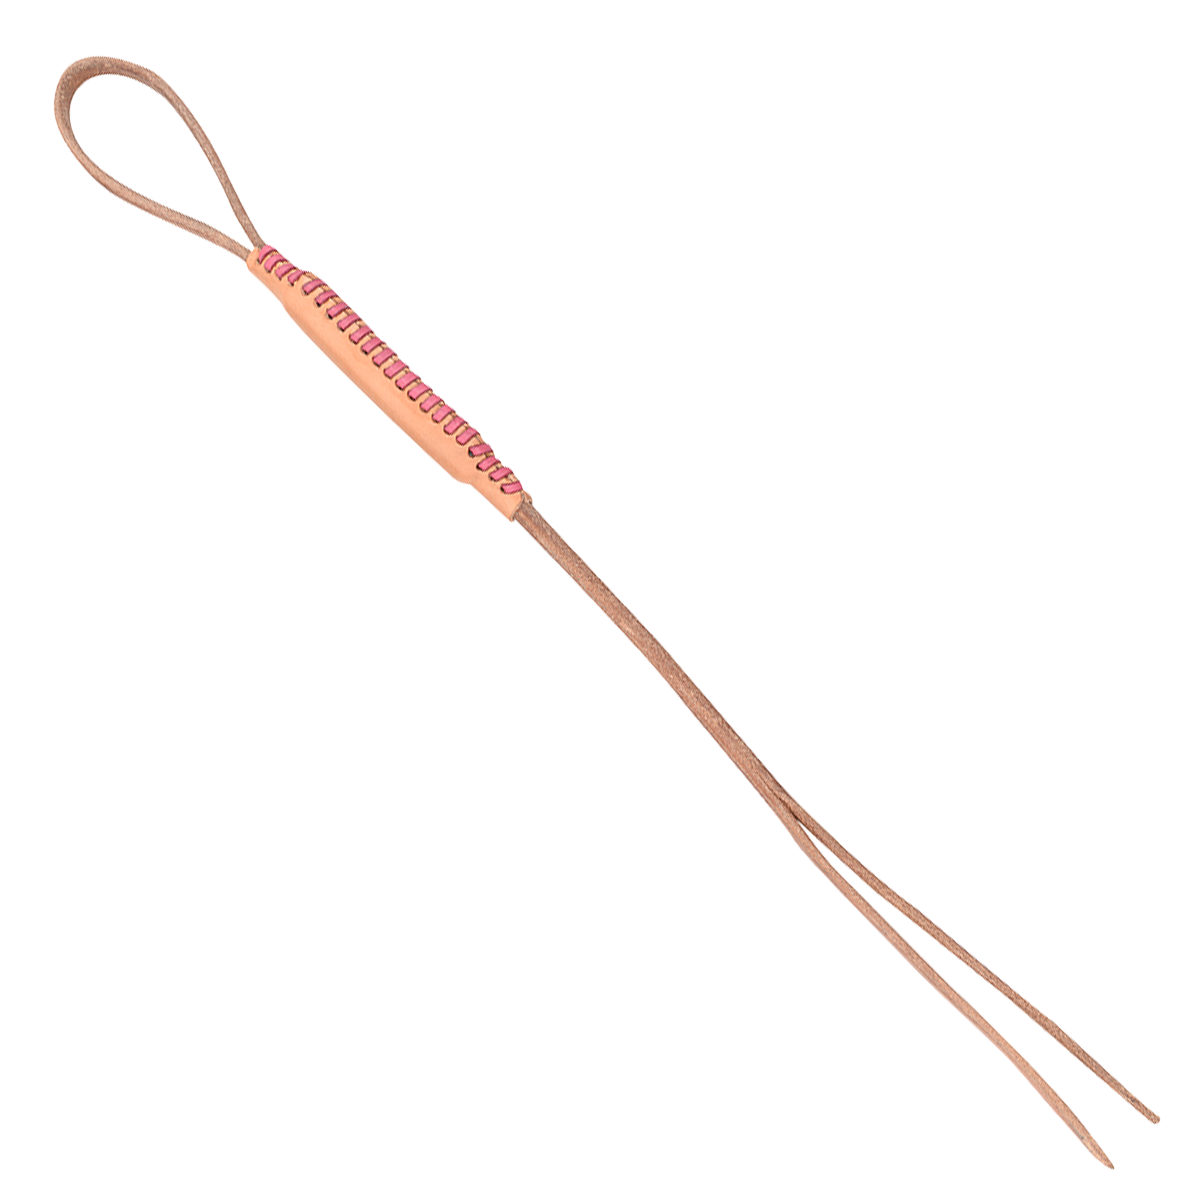 Martin saddlery Leather Quirt - Natural Harness